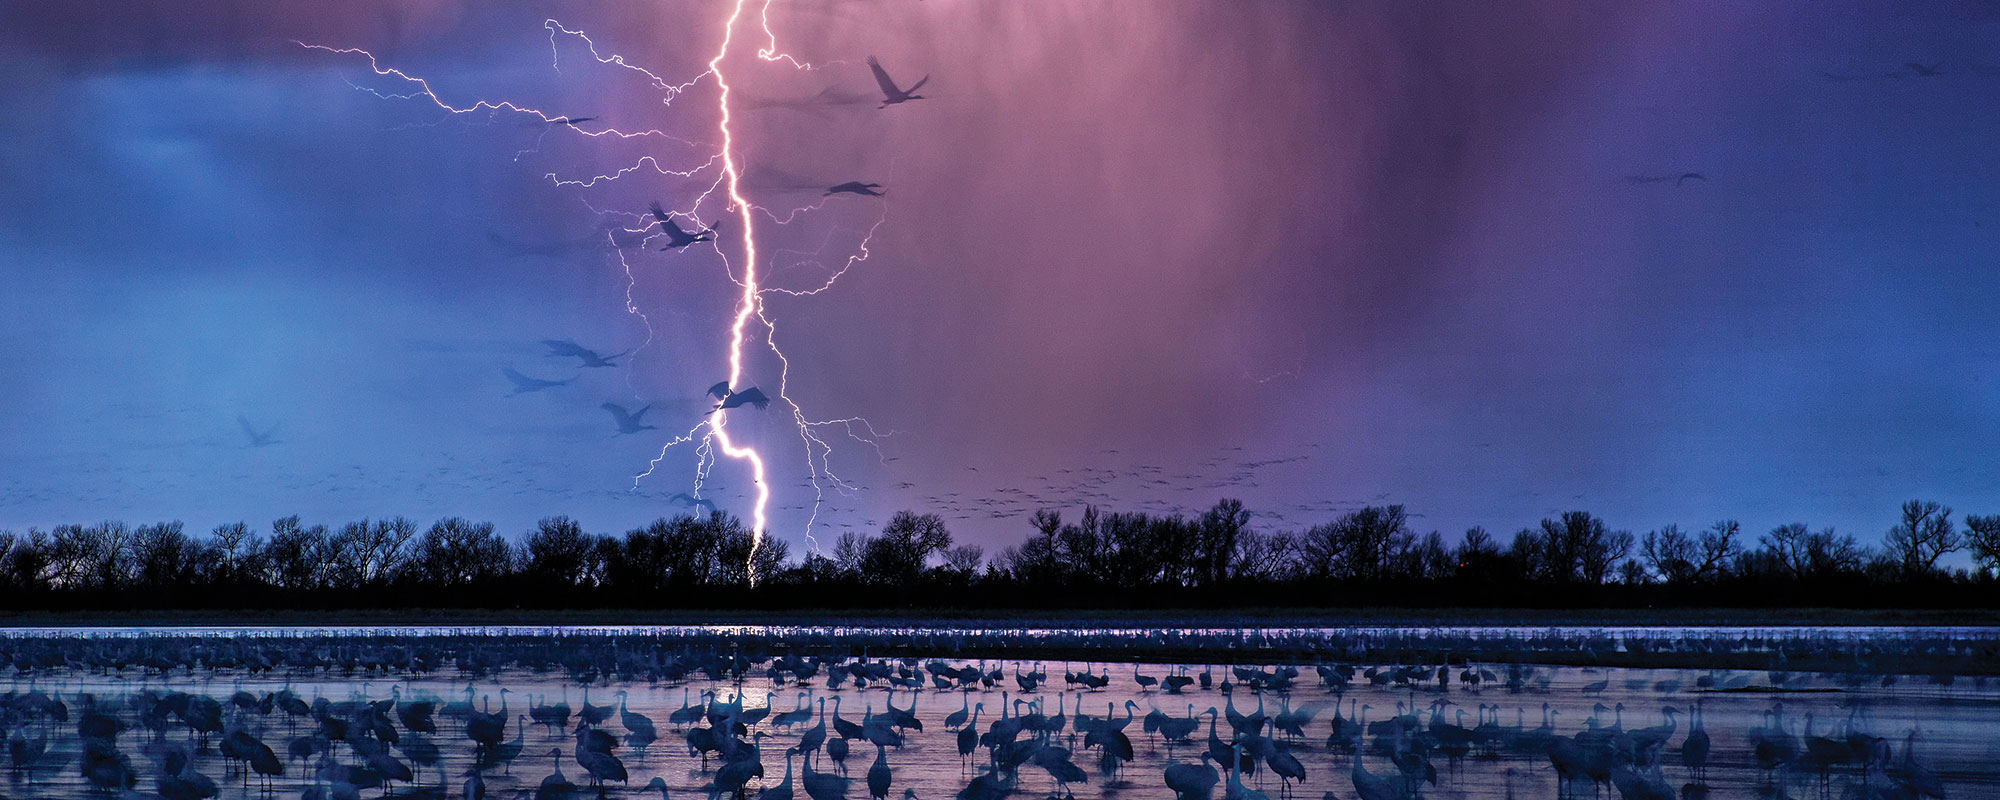 A landscape of Sandhill Cranes with lightening flashing over a river.